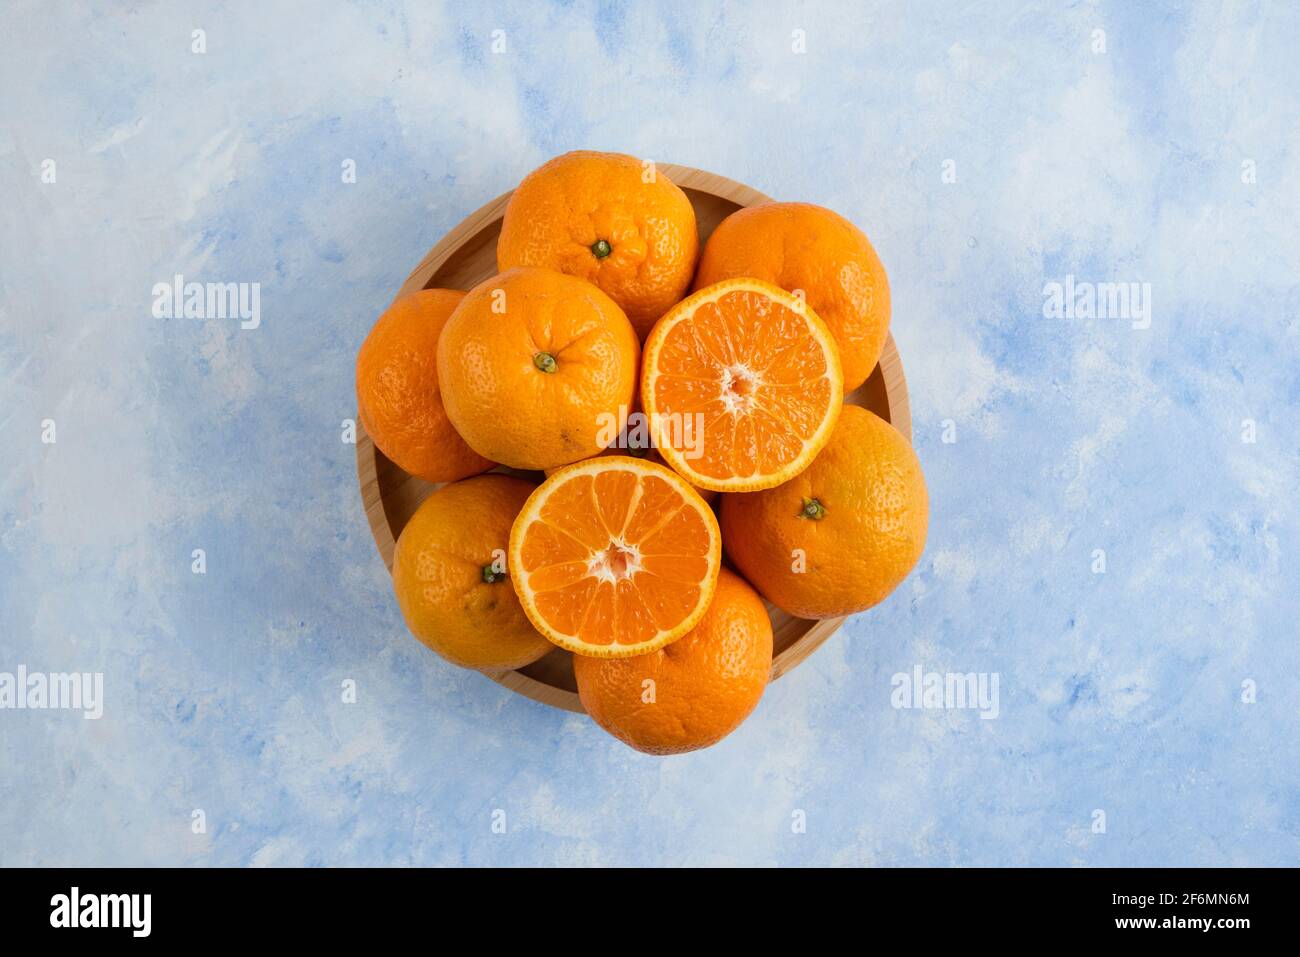 Top view. Pile of clementine mandarins on wooden plate over blue background Stock Photo